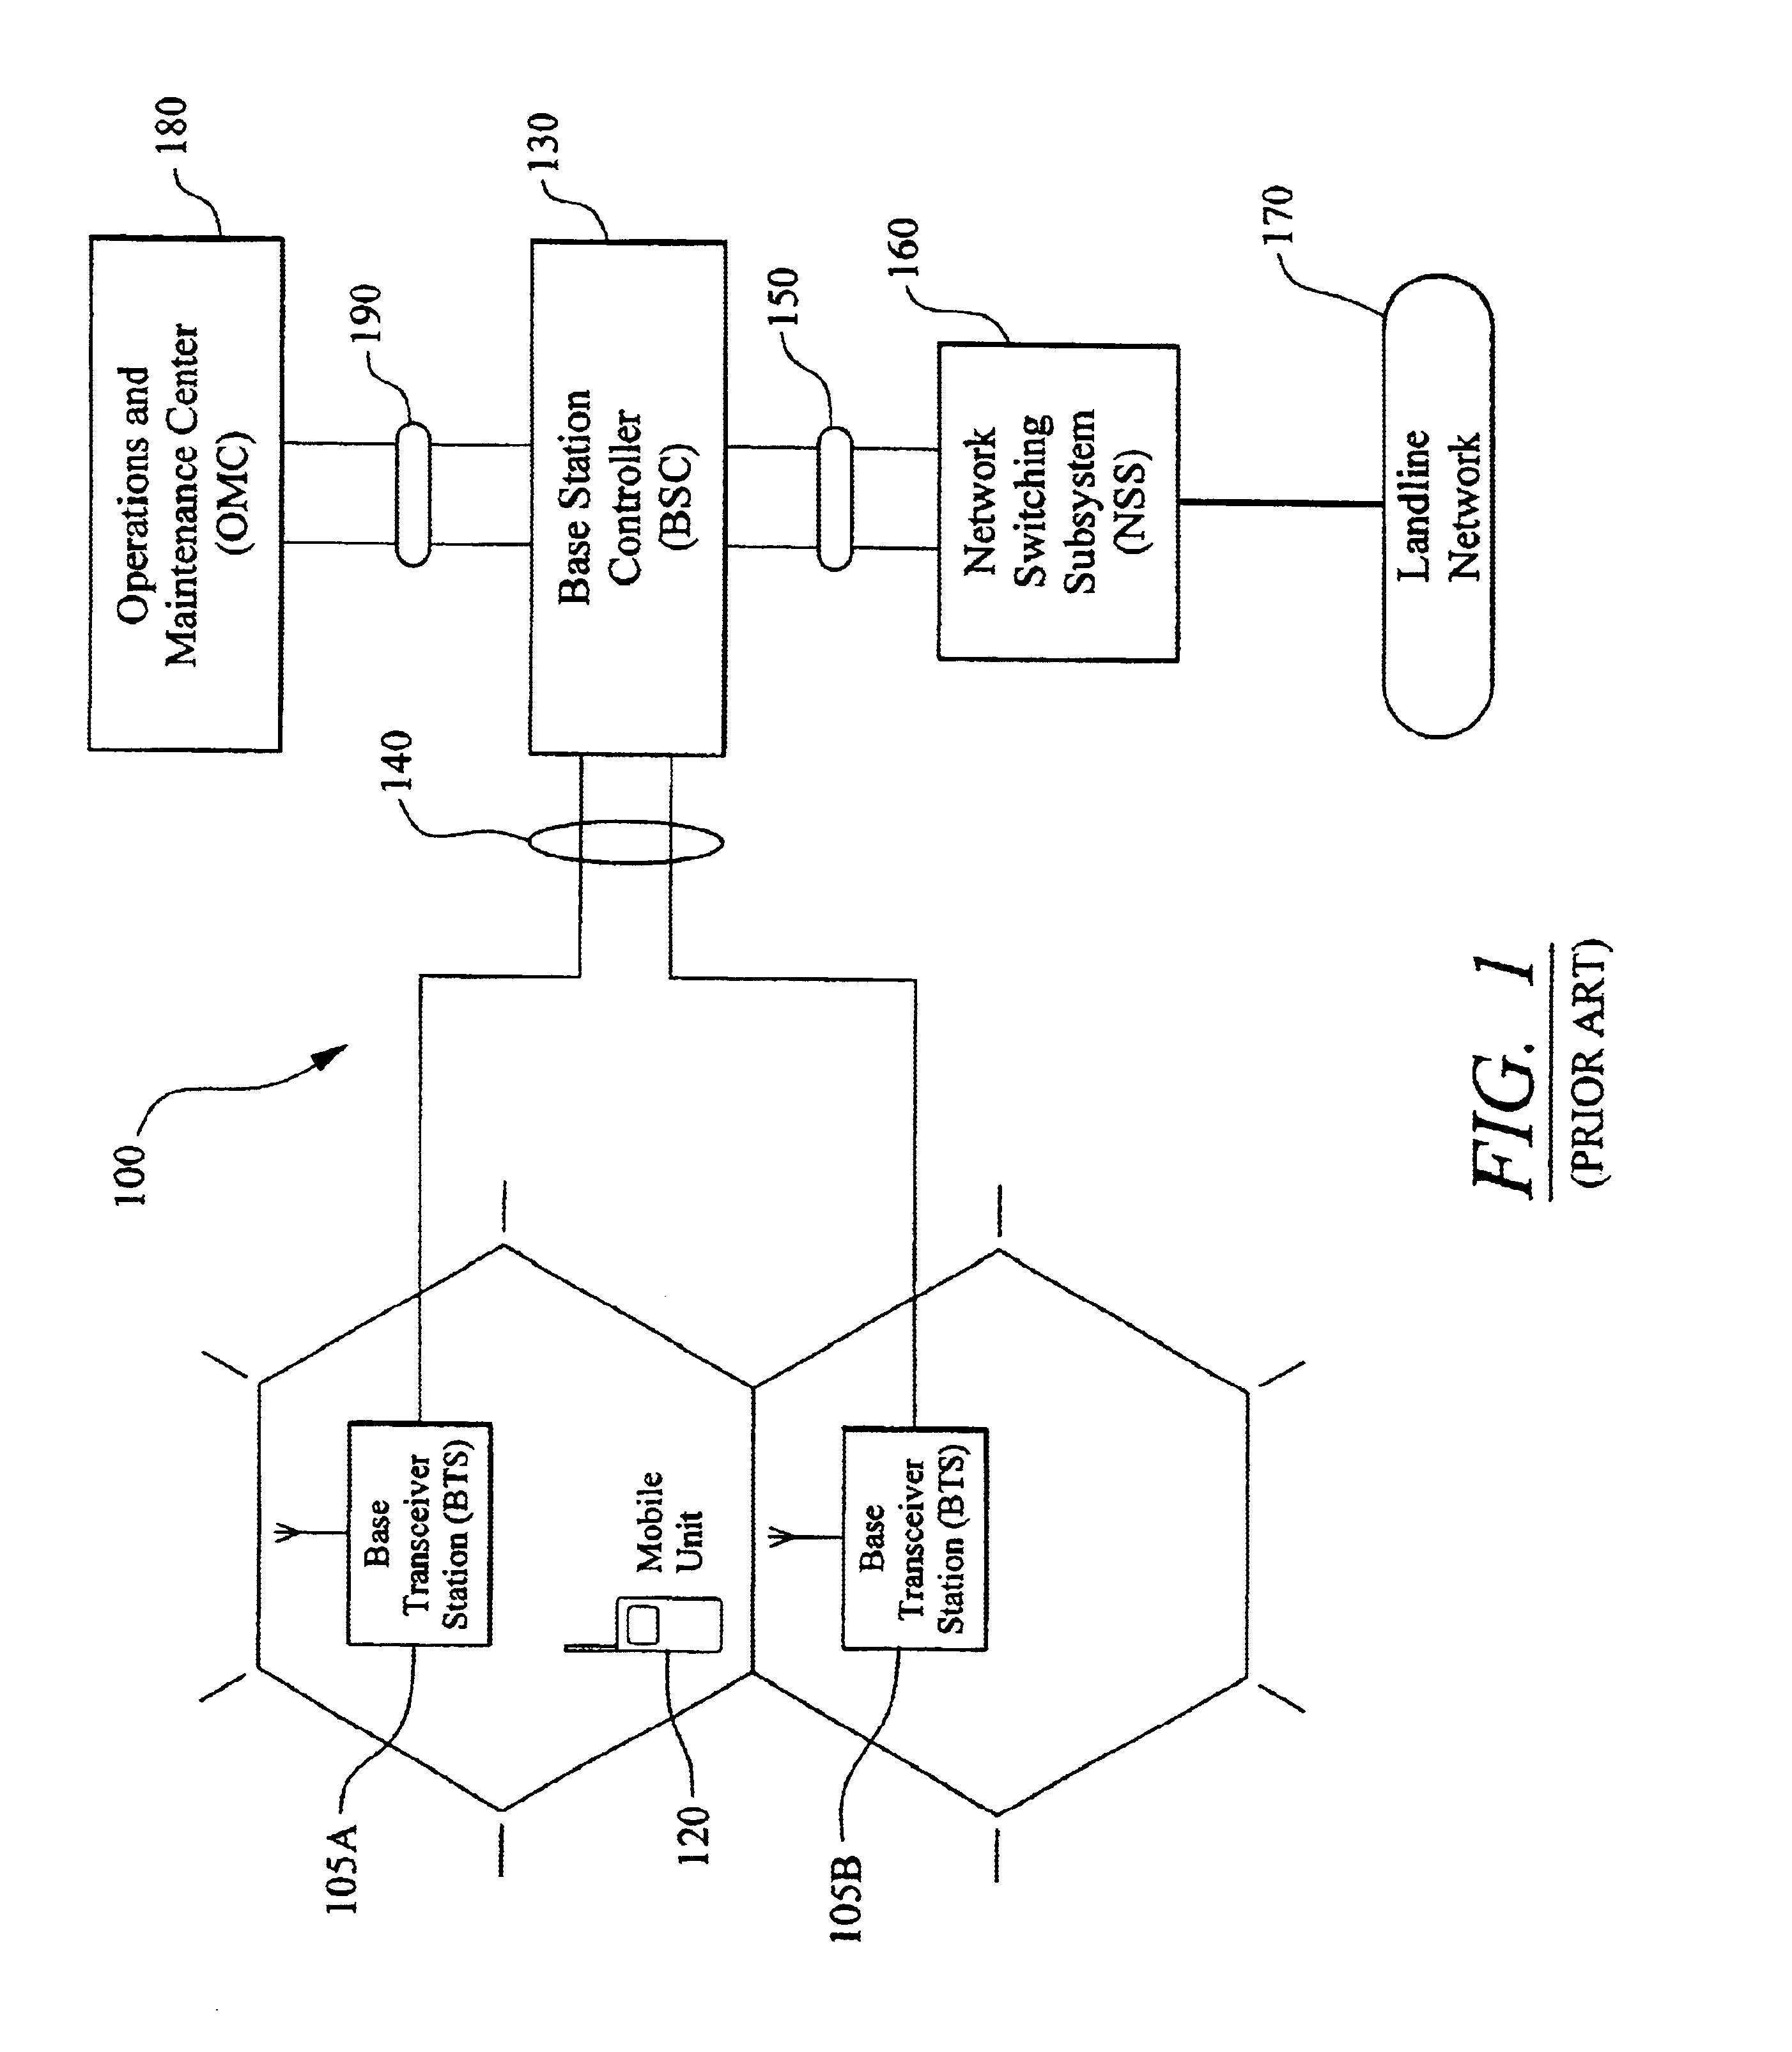 Method and apparatus employing wireless in-band signaling for downlink transmission of commands and uplink transmission of status for a wireless system repeater